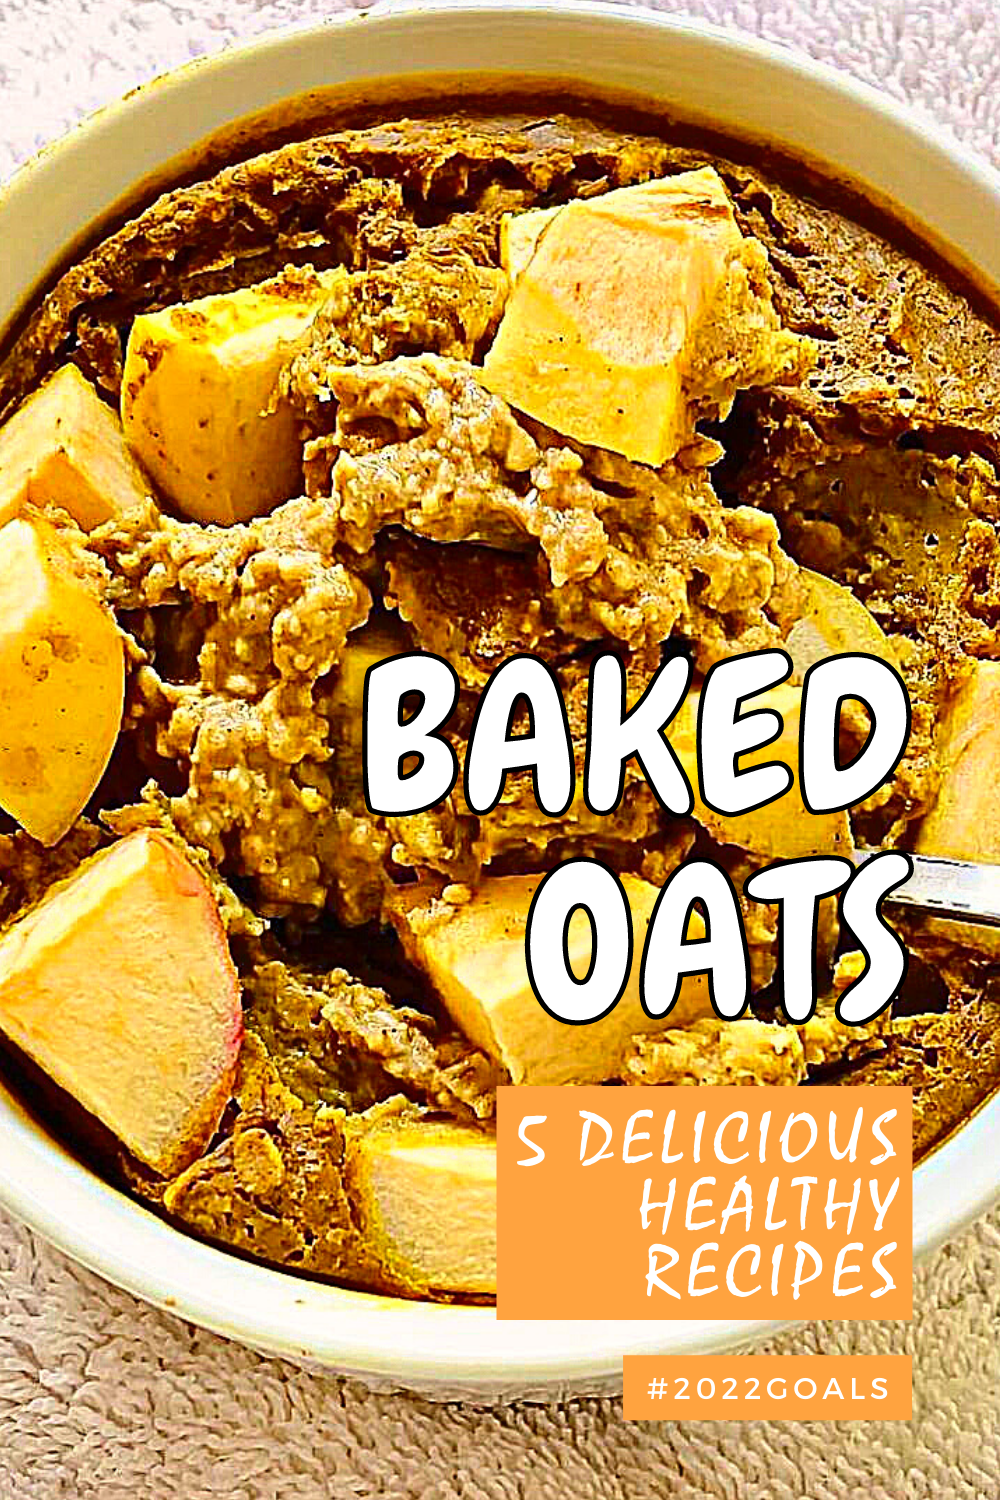 Try these 5 delicious baked oats recipes! So #ASMR !